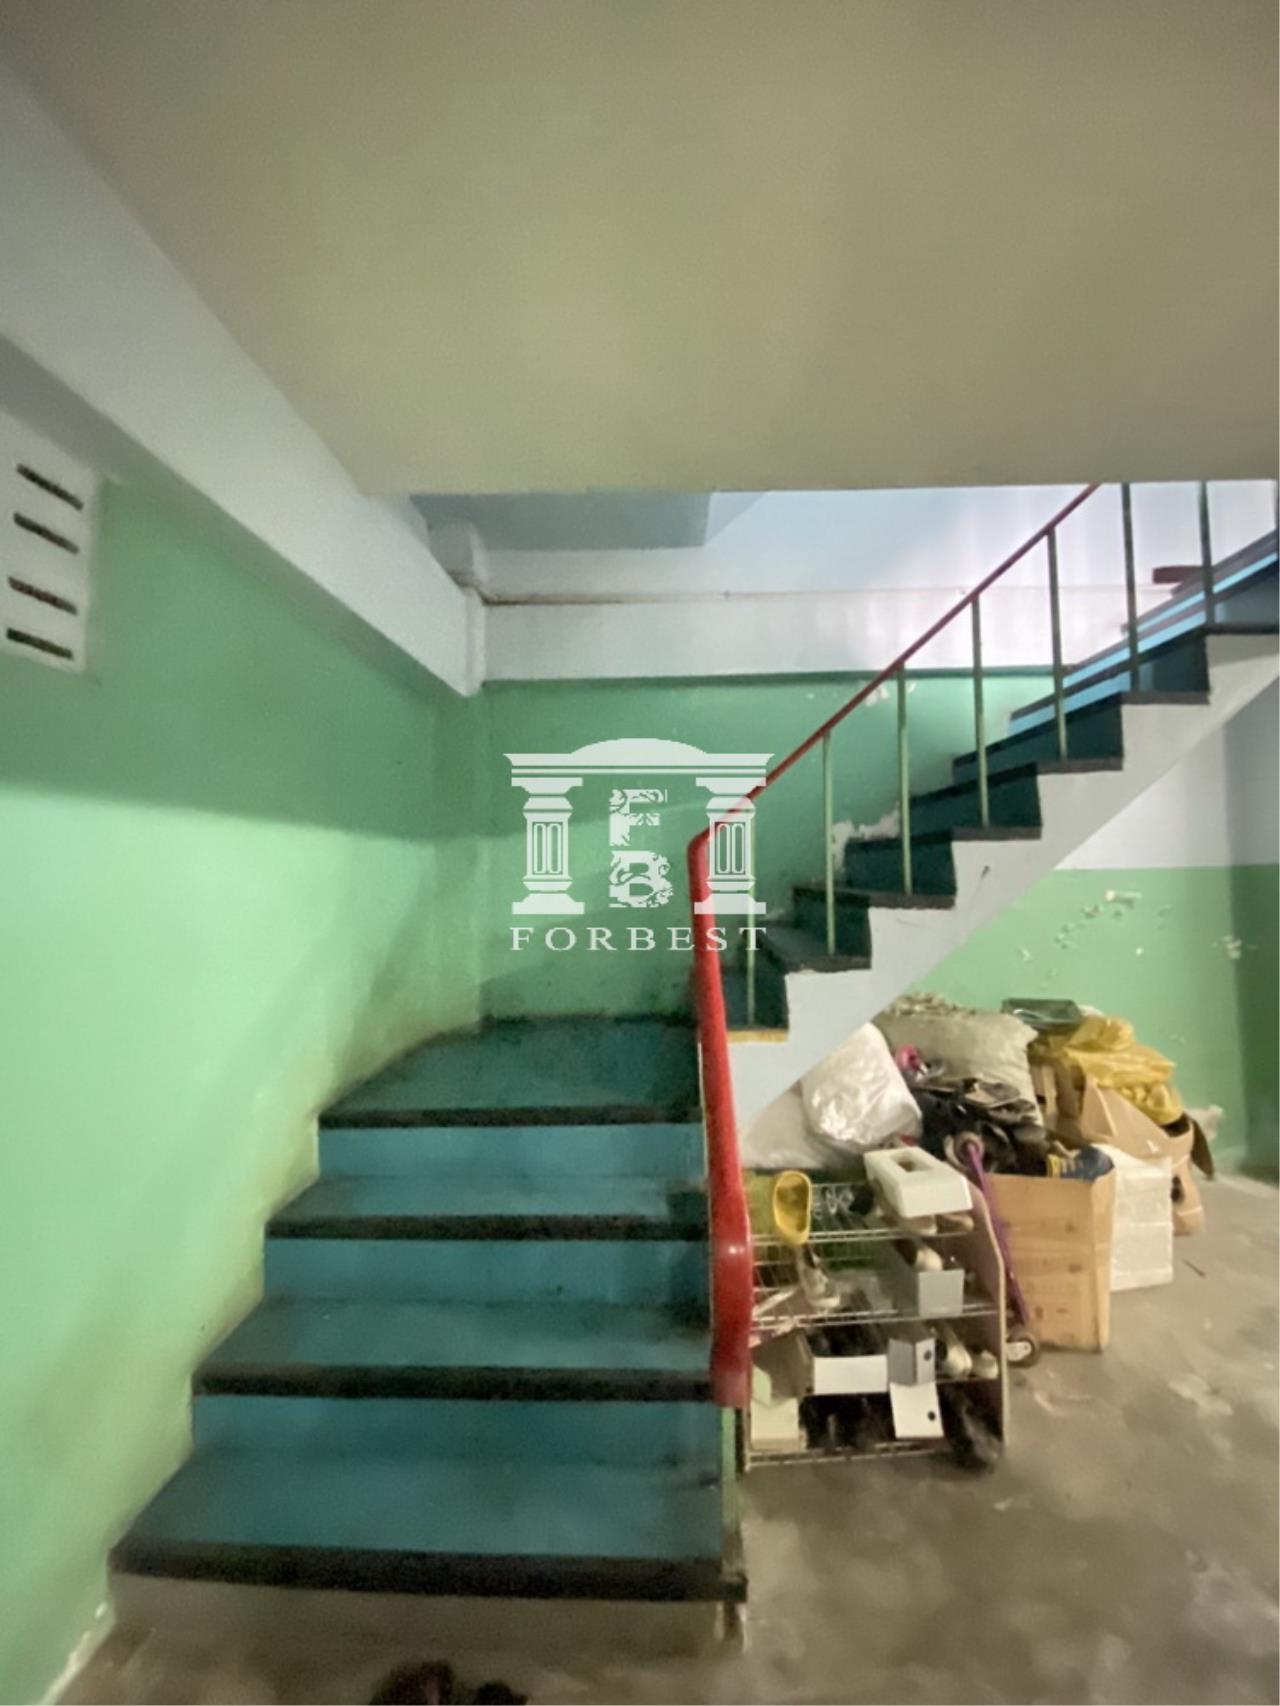 Forbest Properties Agency's 90487 - Taksin, Shophouse for sale, 3 floors, 2 booths, area 184 Sq.m. 2